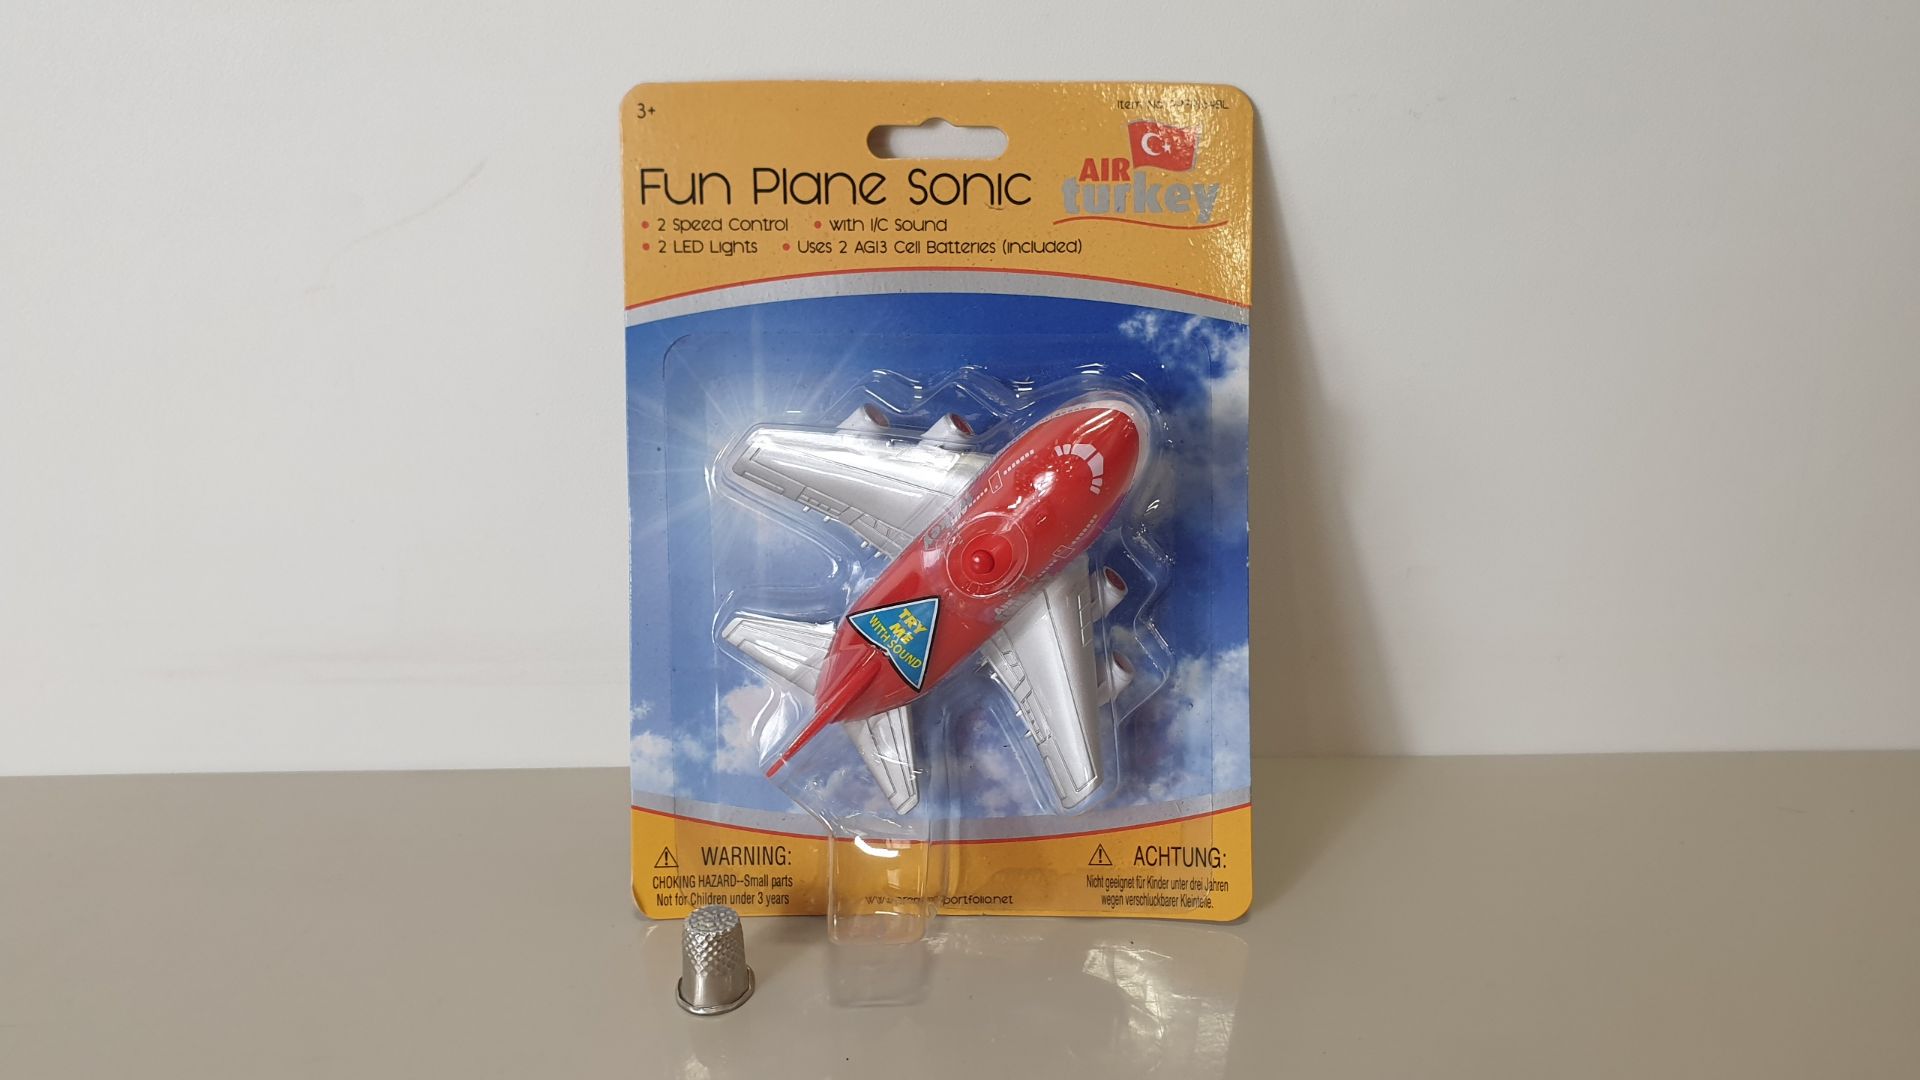 96 X SONIC FUN PLANE WITH LIGHTS & SOUND - AIRTURKEY - BATTERIES INCLUDED - (PPFP164BL) - ORIG